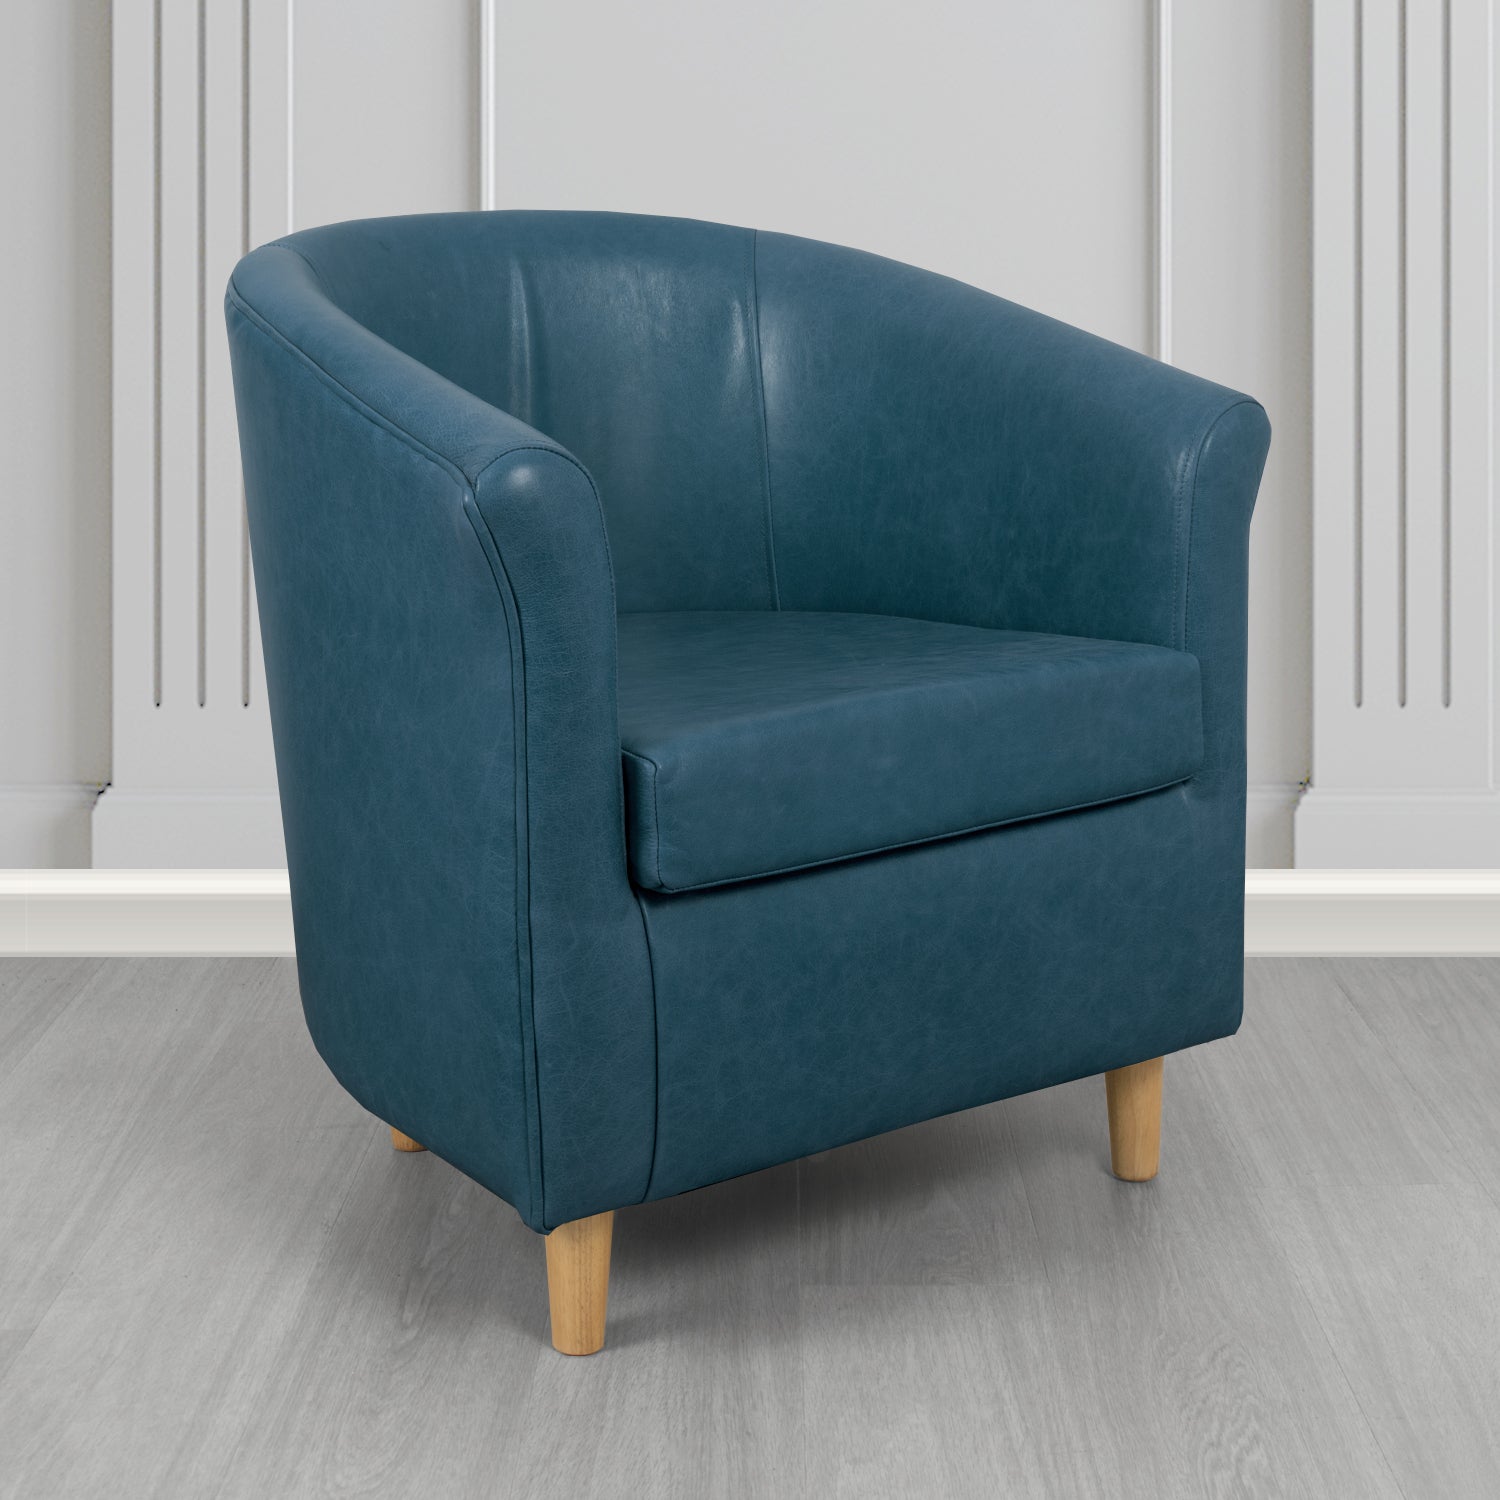 Tuscany Tub Chair in Crib 5 Old English Ocean Genuine Leather - The Tub Chair Shop